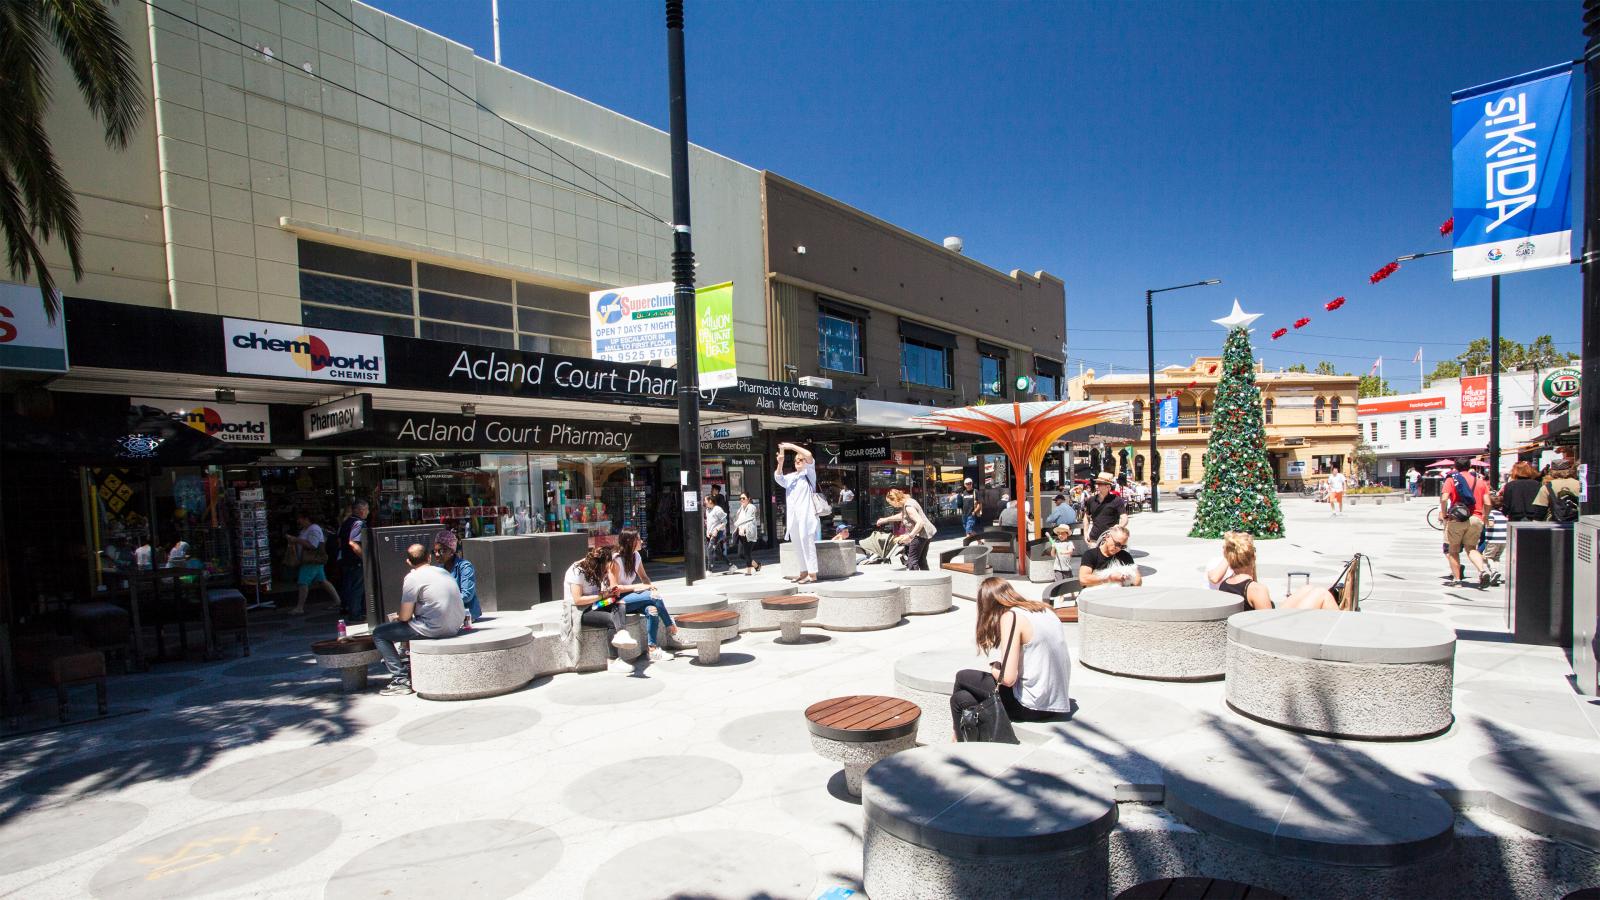 People are sitting on circular concrete benches in a lively plaza in St Kilda, with shops like Acland Court Pharmacy and Chemist World. A large Christmas tree and a flower-shaped structure are also visible. Red and blue shop signs and flags adorn Acland Street against a clear blue sky.